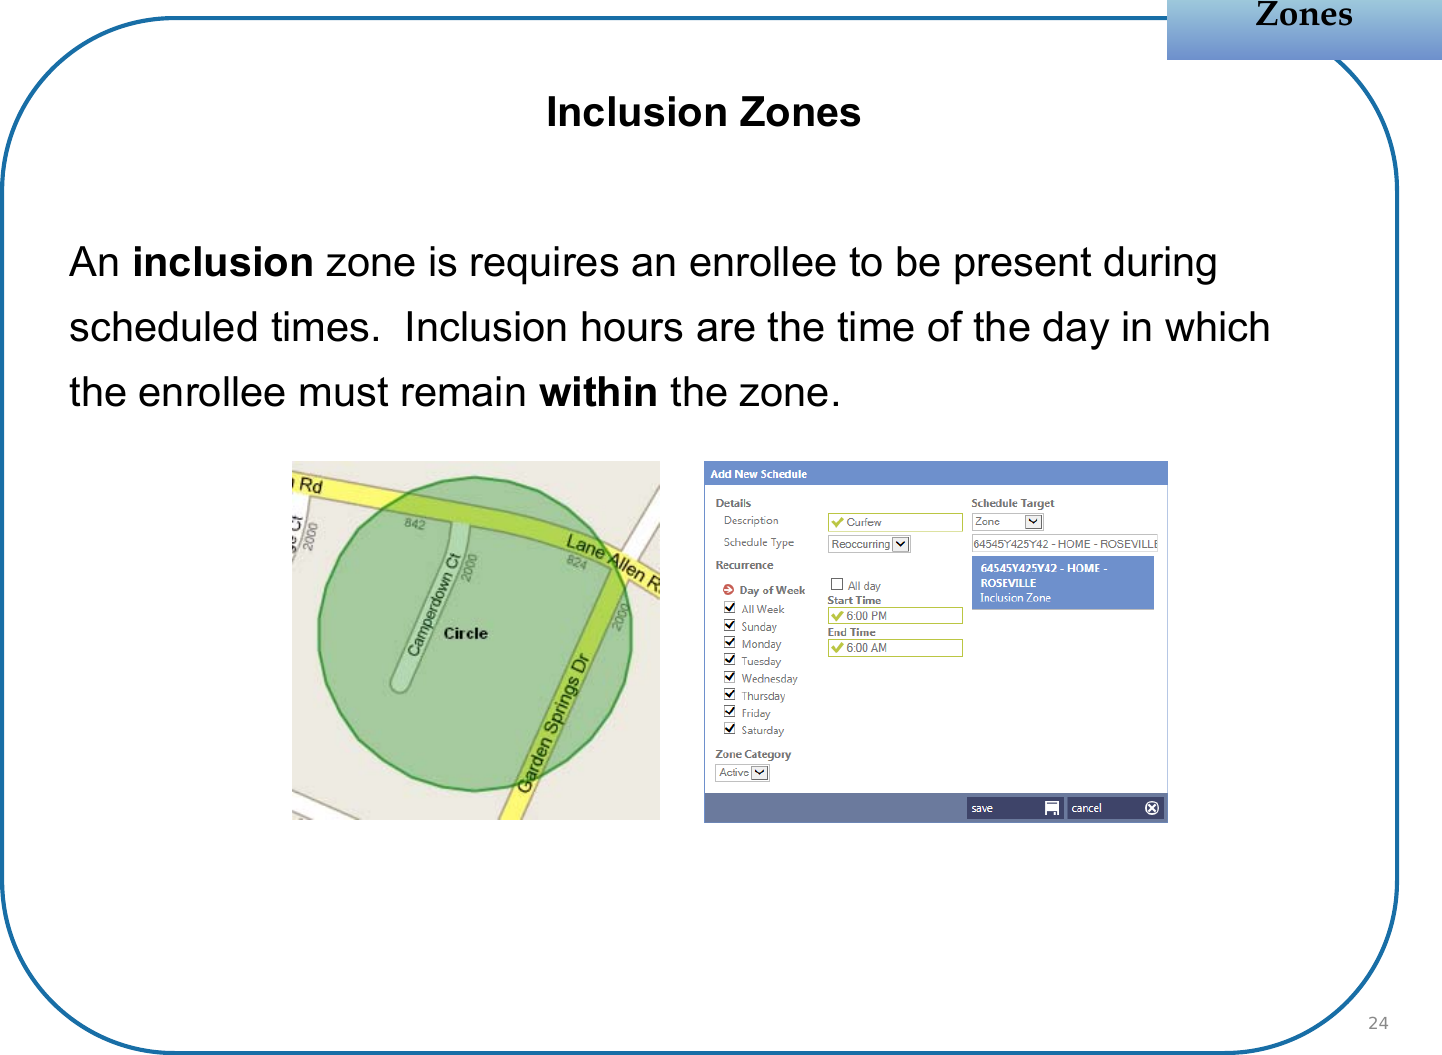 Inclusion ZonesAn inclusion zone is requires an enrollee to be present during scheduled times.  Inclusion hours are the time of the day in which the enrollee must remain within the zone.ZonesZones24